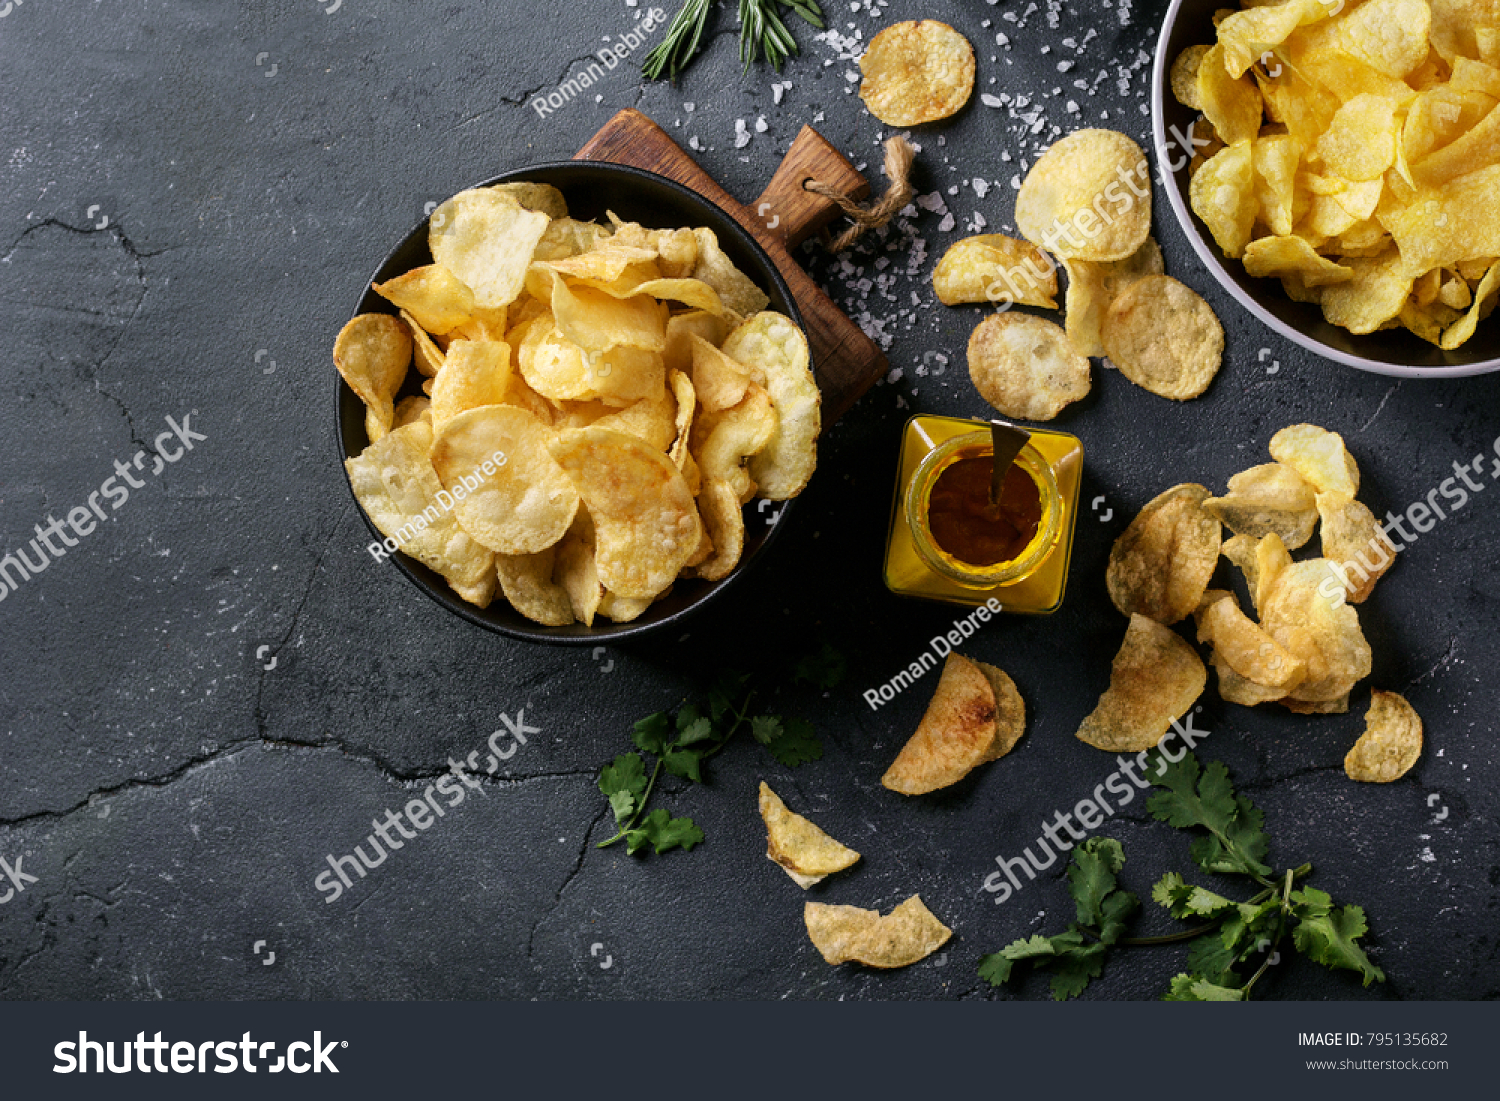 Bowl of home made potato chips served with mustard, rosemary, fleur de sel salt on stone background. Top view. Copy space #795135682